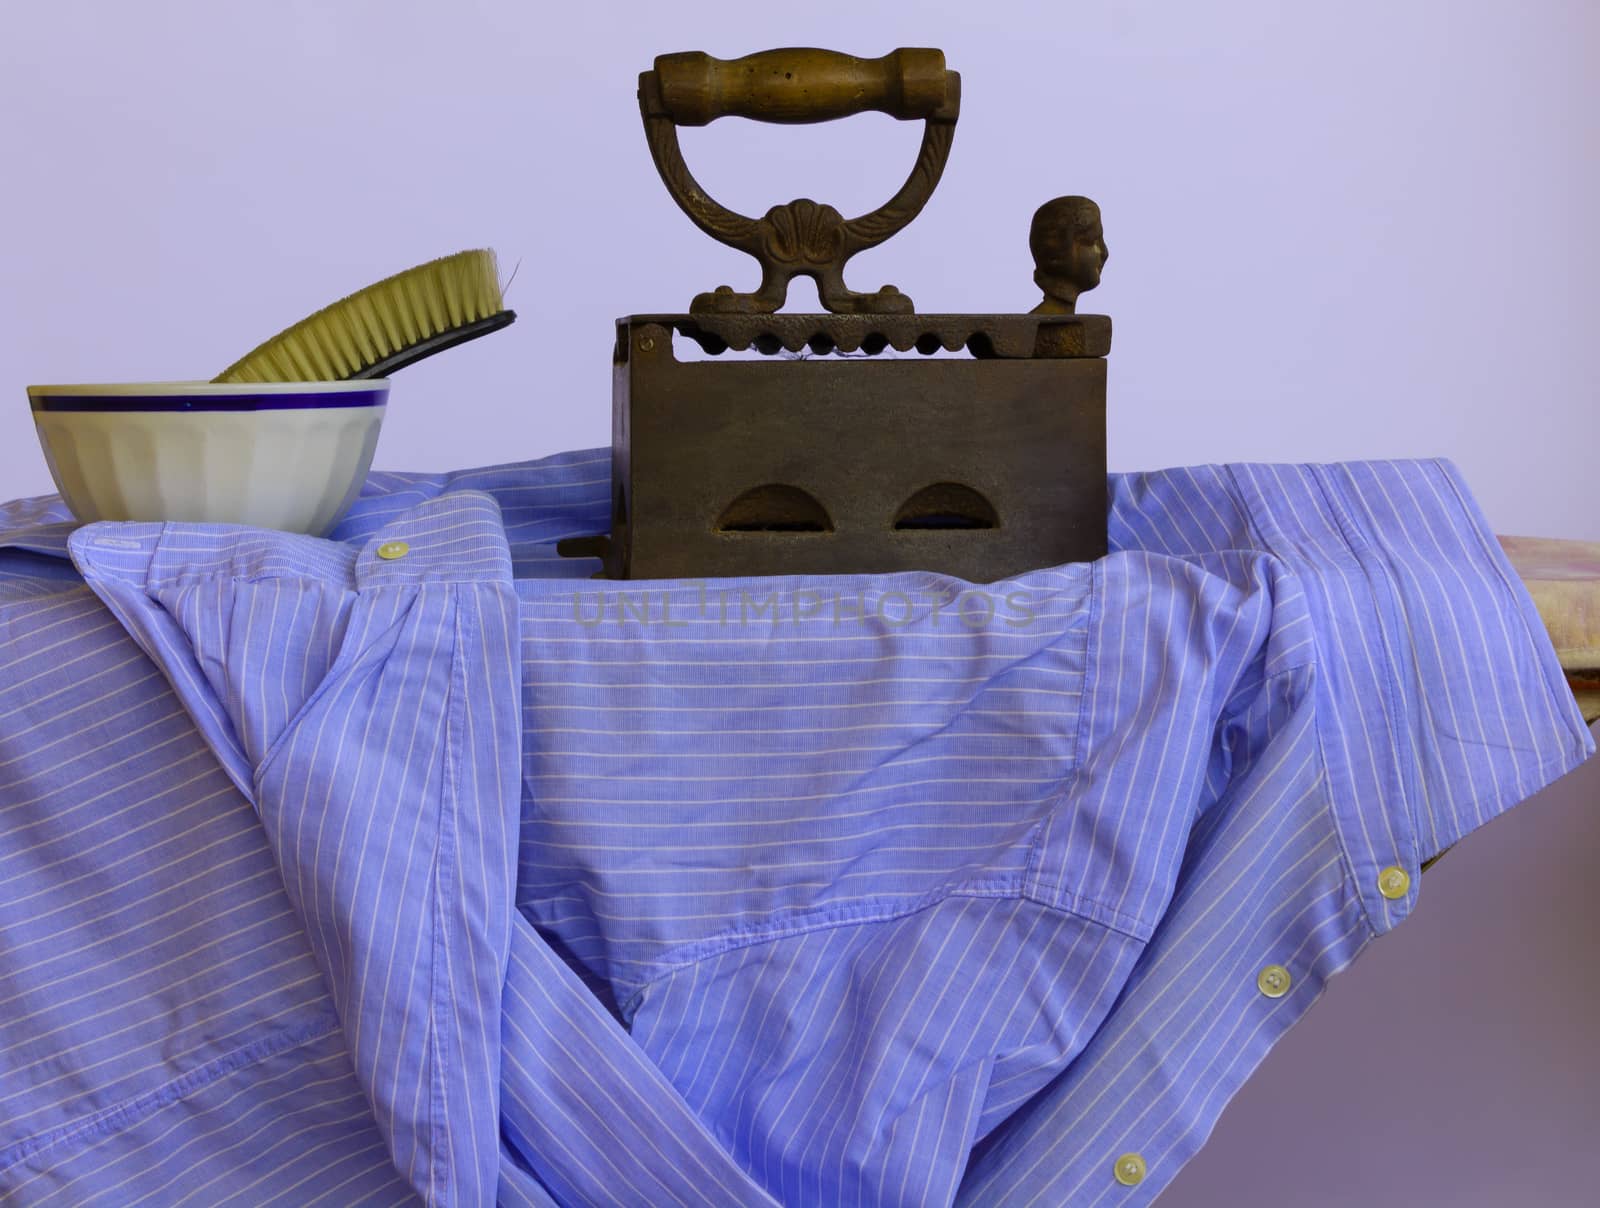 ironing a shirt by moorea